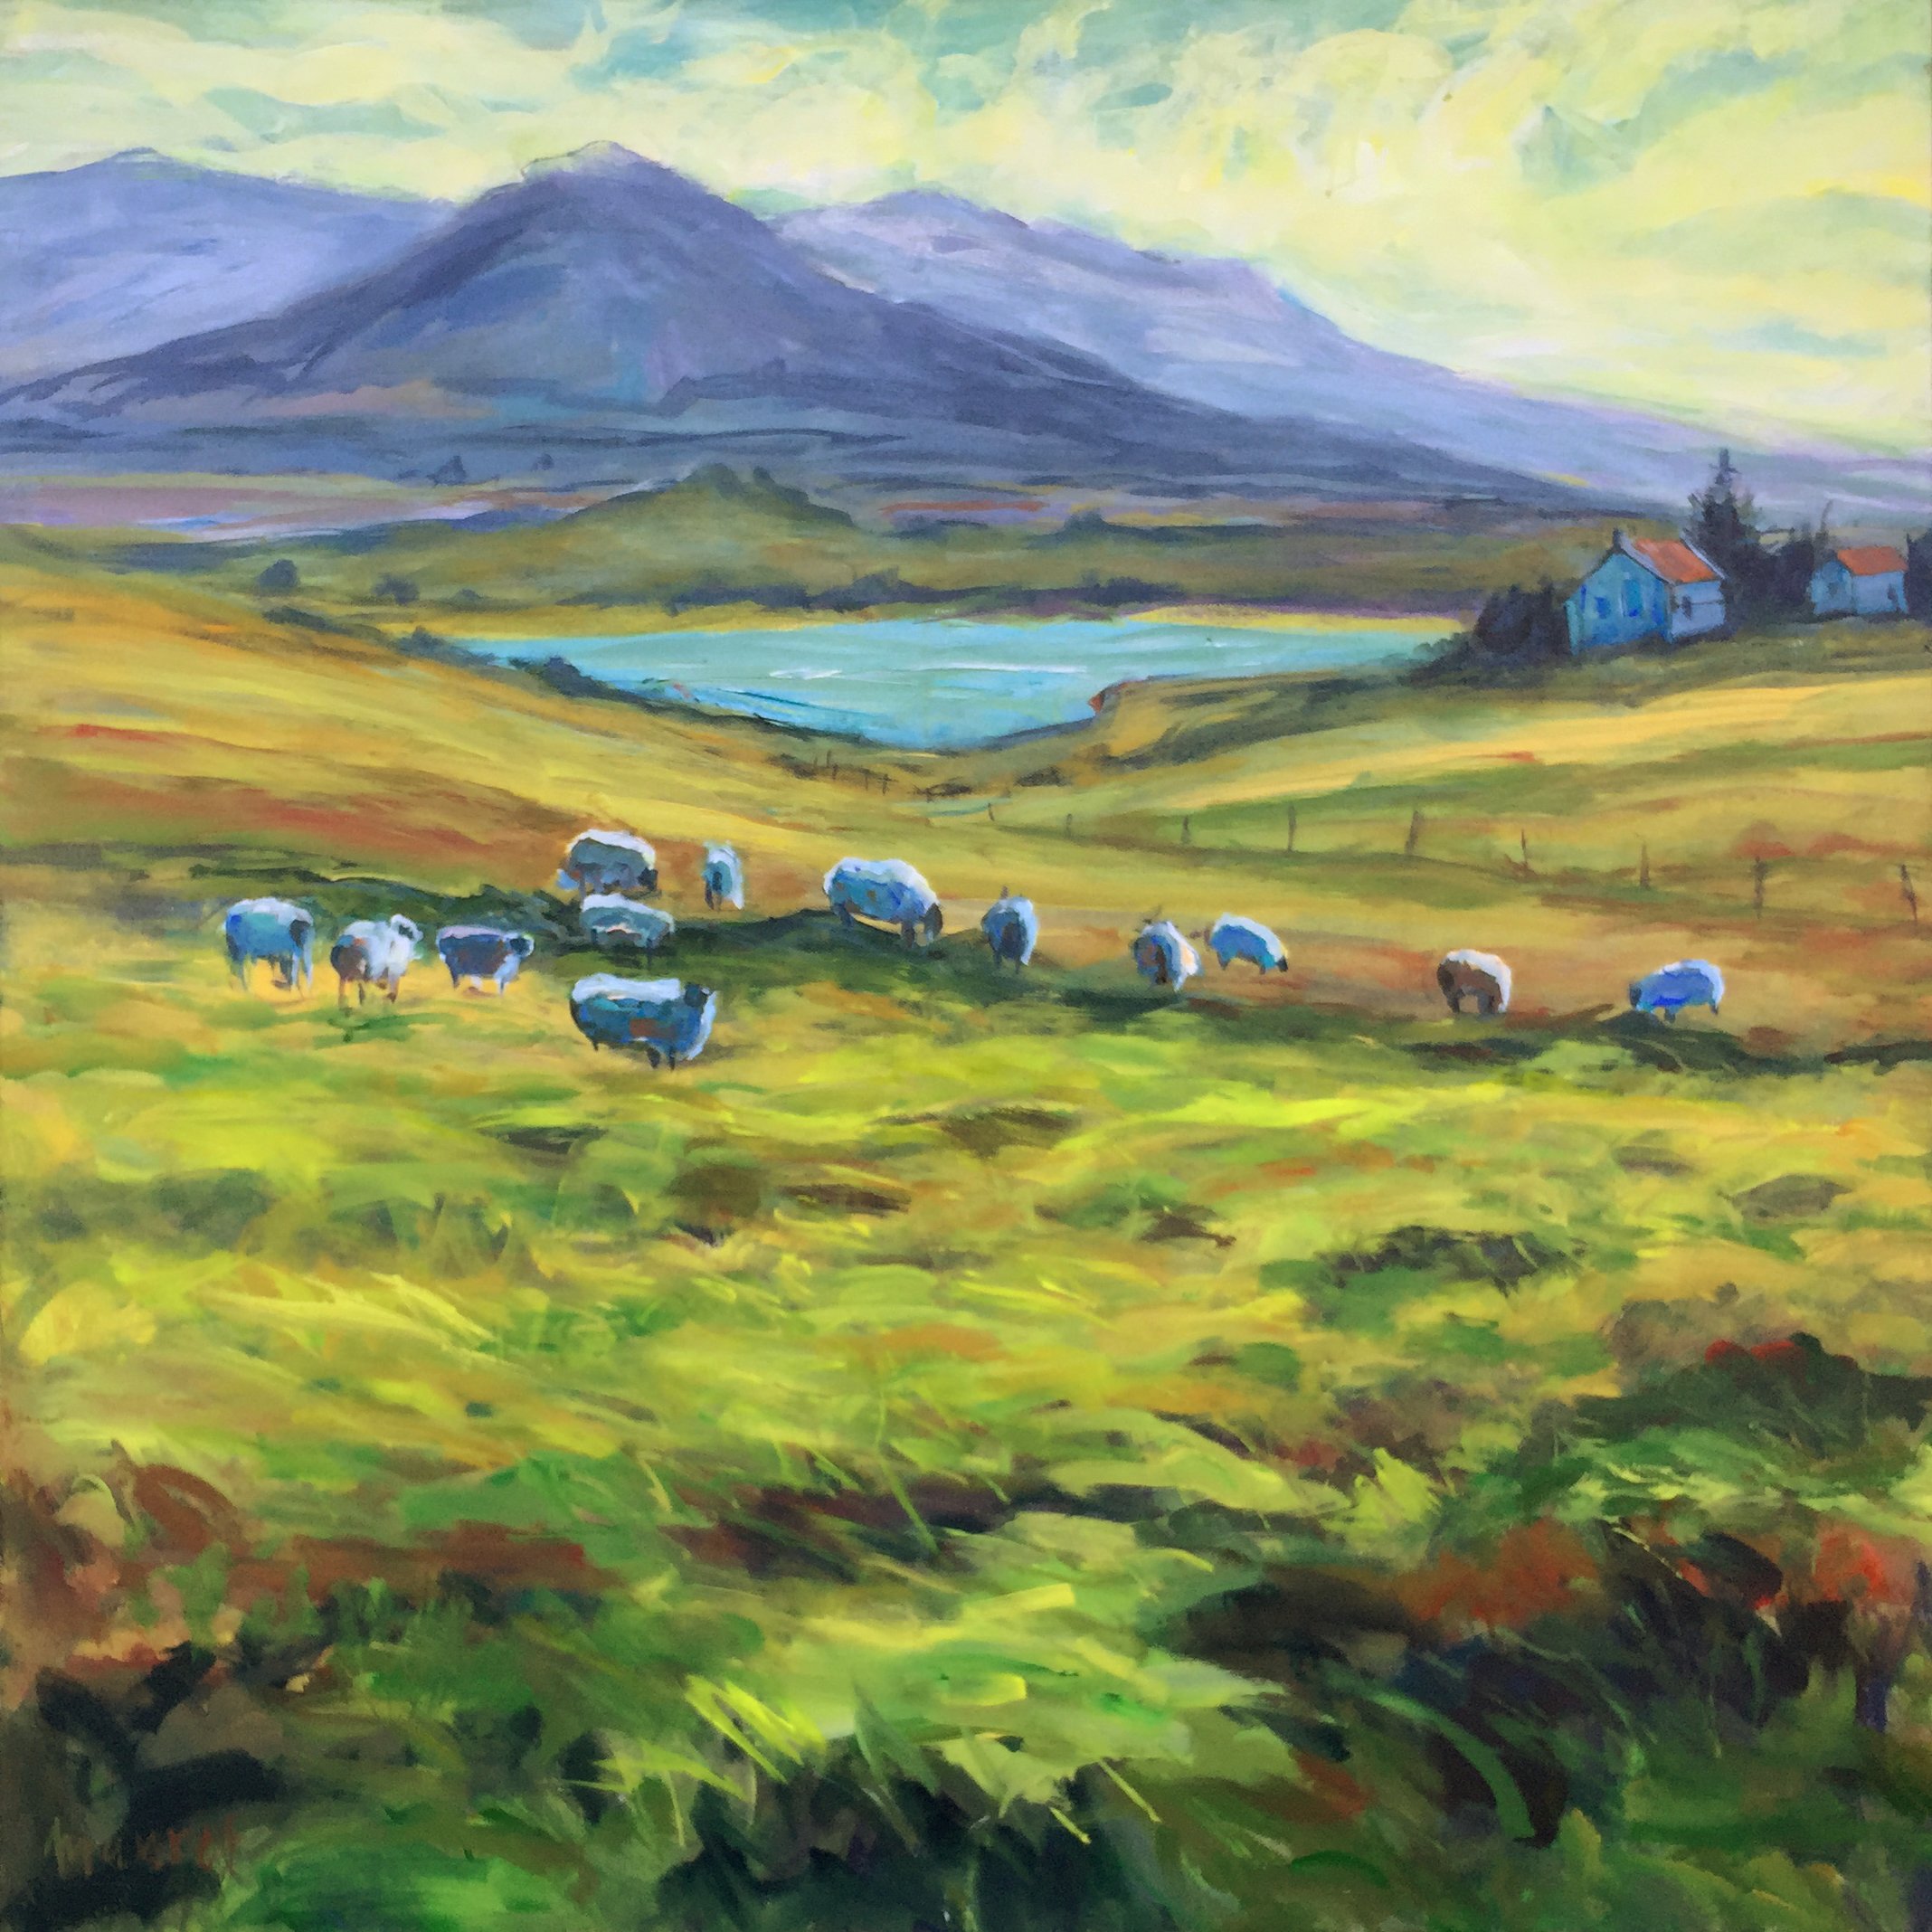 John Maurer; Grazing Derryinver Ireland, 2019, Original Painting Acrylic, 32 x 32 inches. Artwork description: 241 Ireland is my current favorite subject for painting.  It was my most recent travel destination.  This piece is one of the zillion stunning views I experienced on my two week excursion.  Painted on canvas using palette knives and brushes.  Includes a brushed silver floater frame. ...